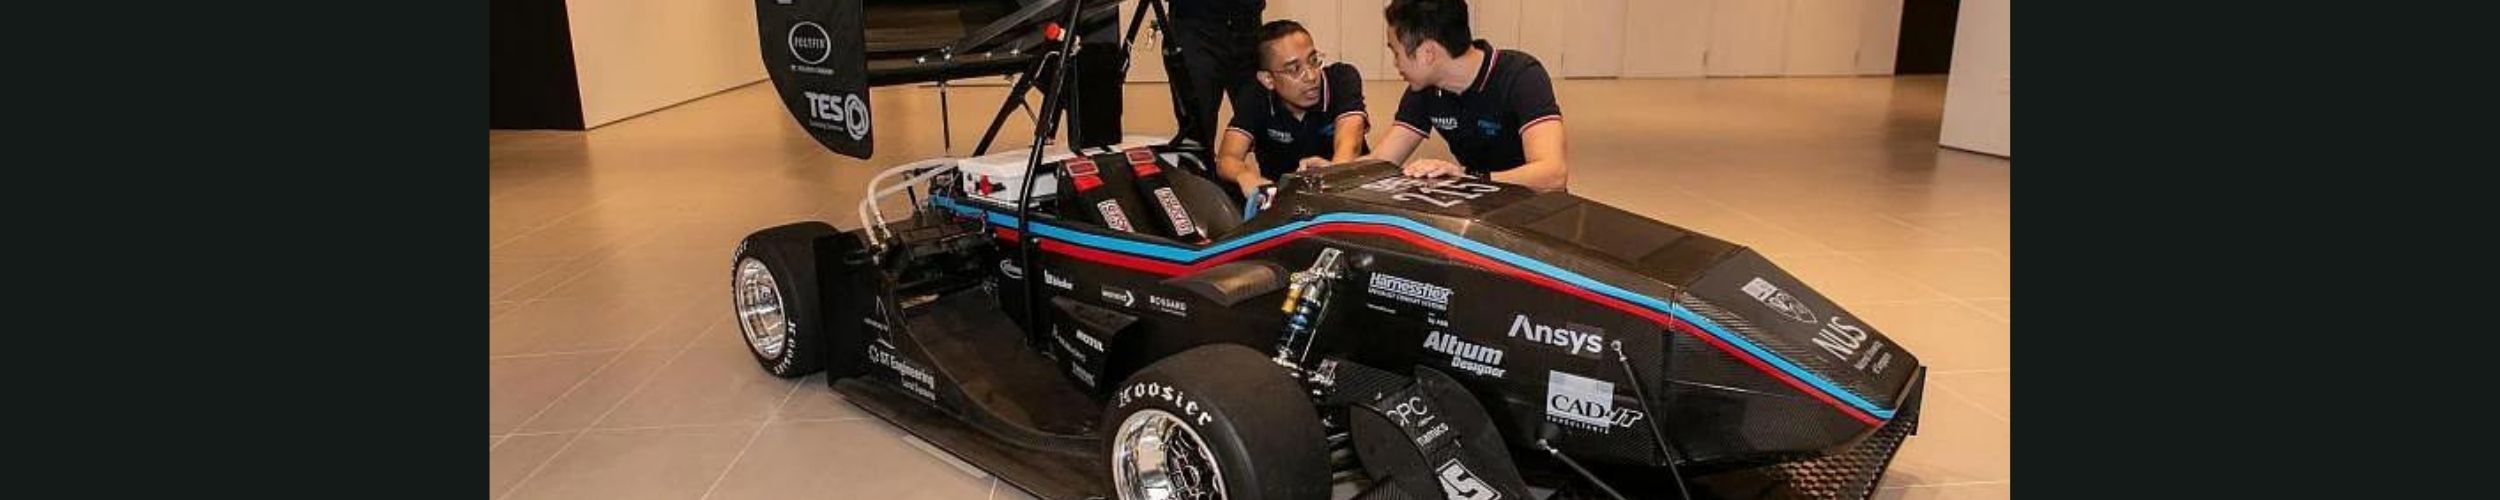 NUS students with electric race car